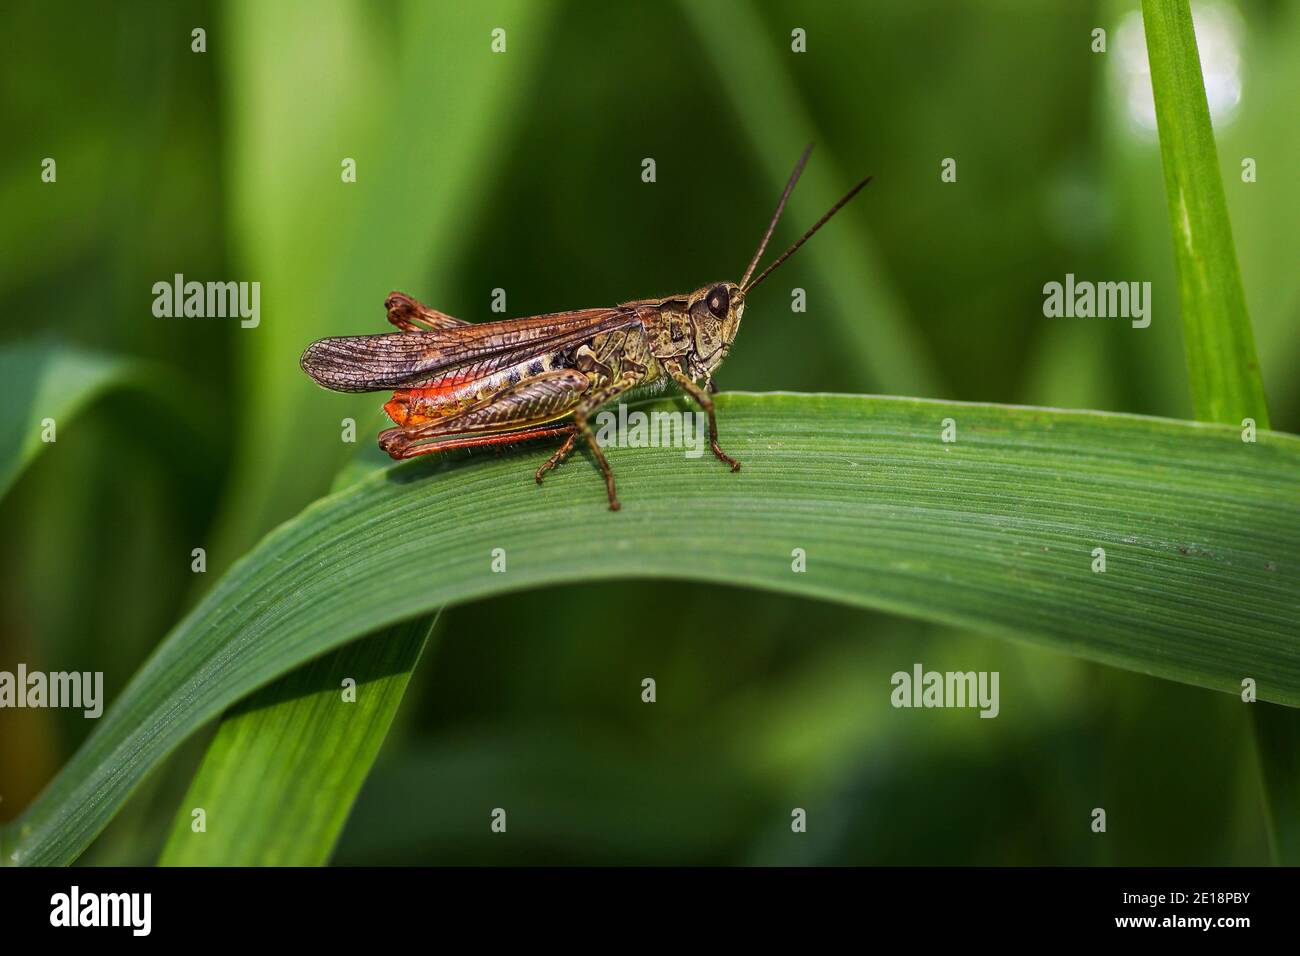 The red-bodied grasshopper (Omocestus haemorrhoidalis) is a grasshopper from the family of field locusts (Acrididae). This male walk on a leaf. Stock Photo